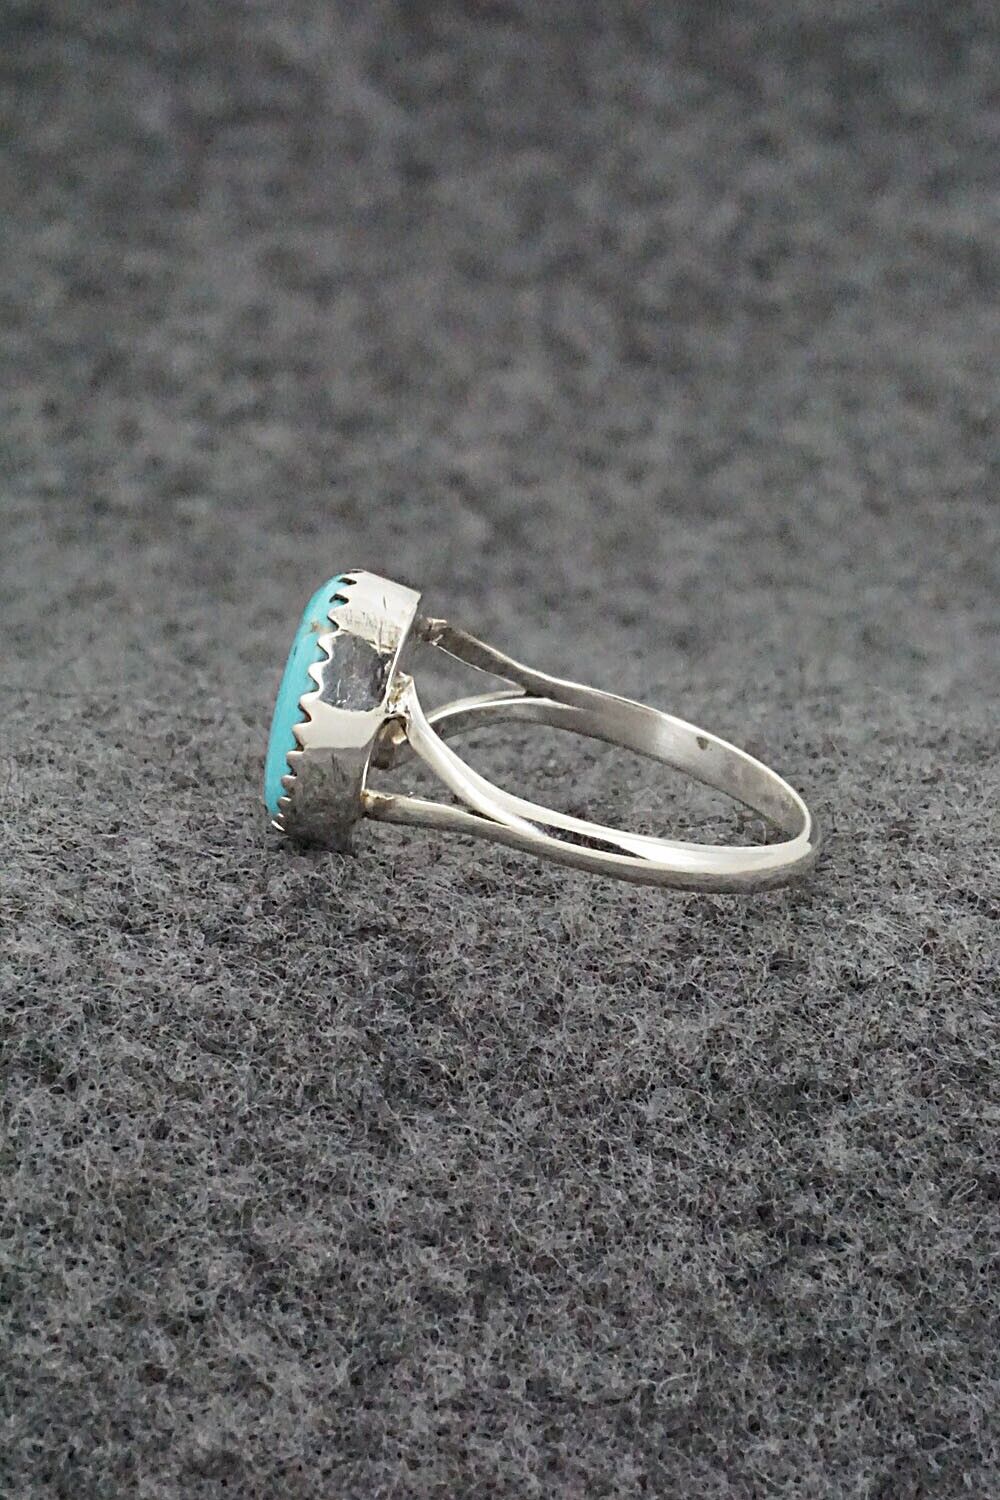 Turquoise & Sterling Silver Ring - Theresa Smith - Size 6.5